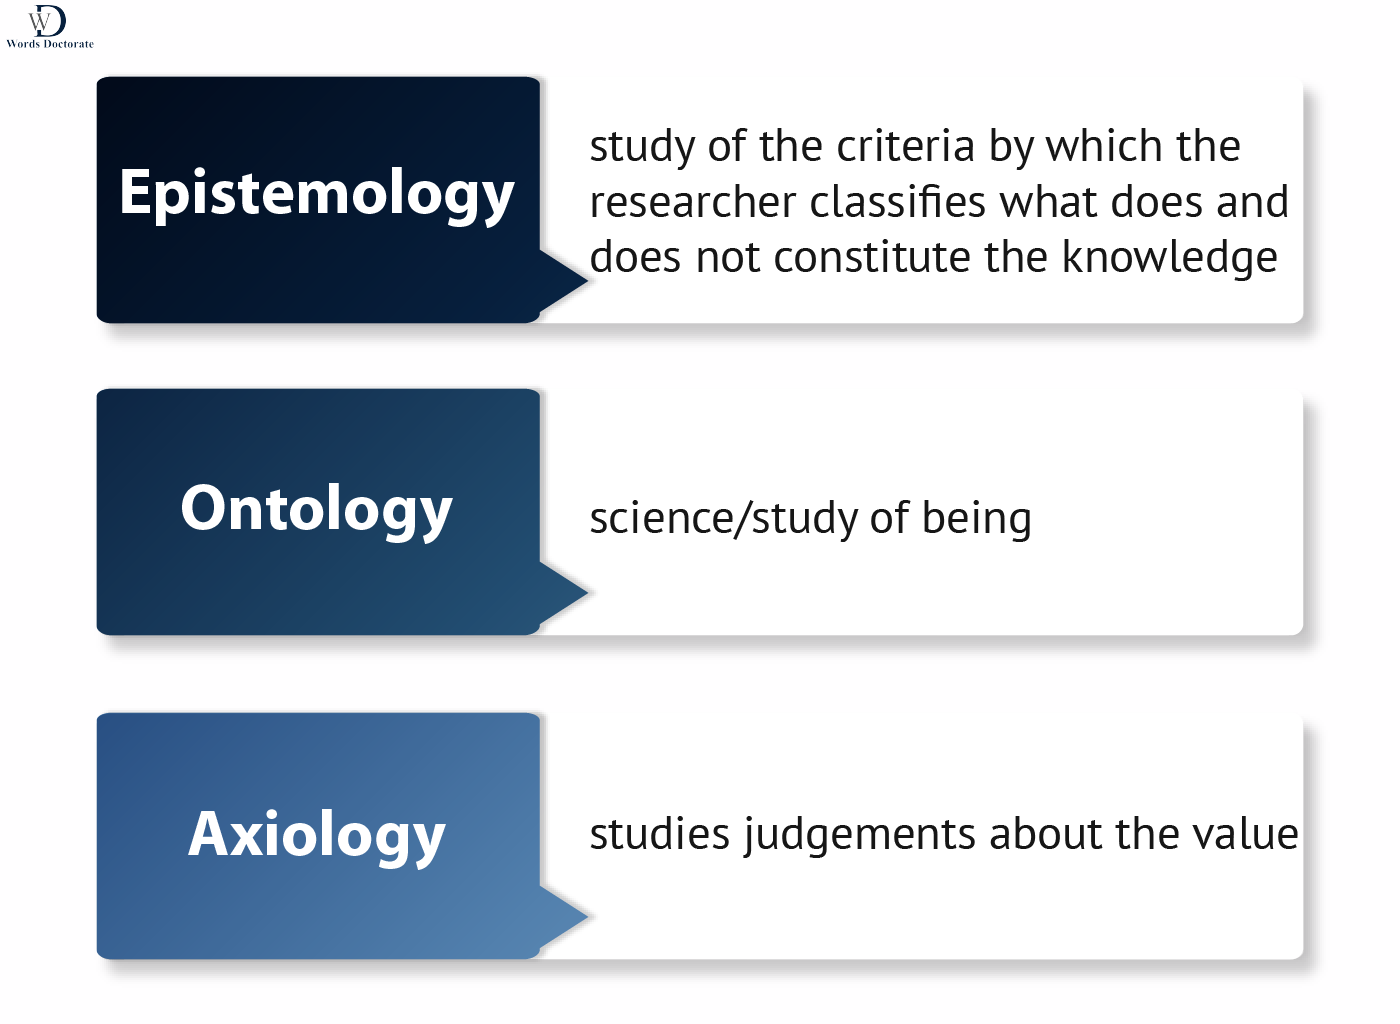 Research Philosophy - Words Doctorate